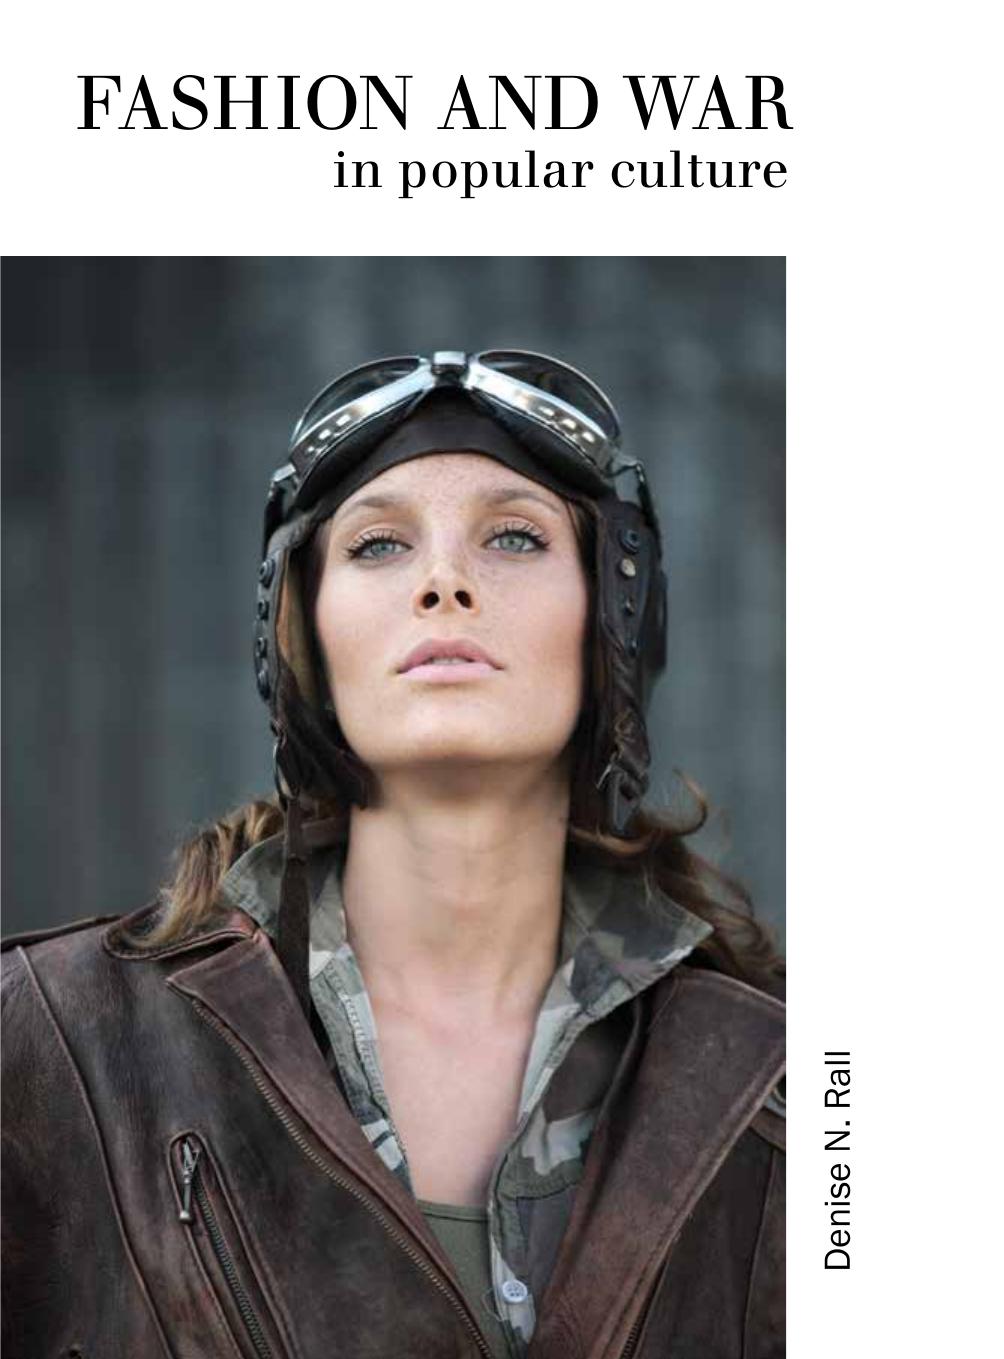 Fashion & War in Popular Culture by Denise N Rall